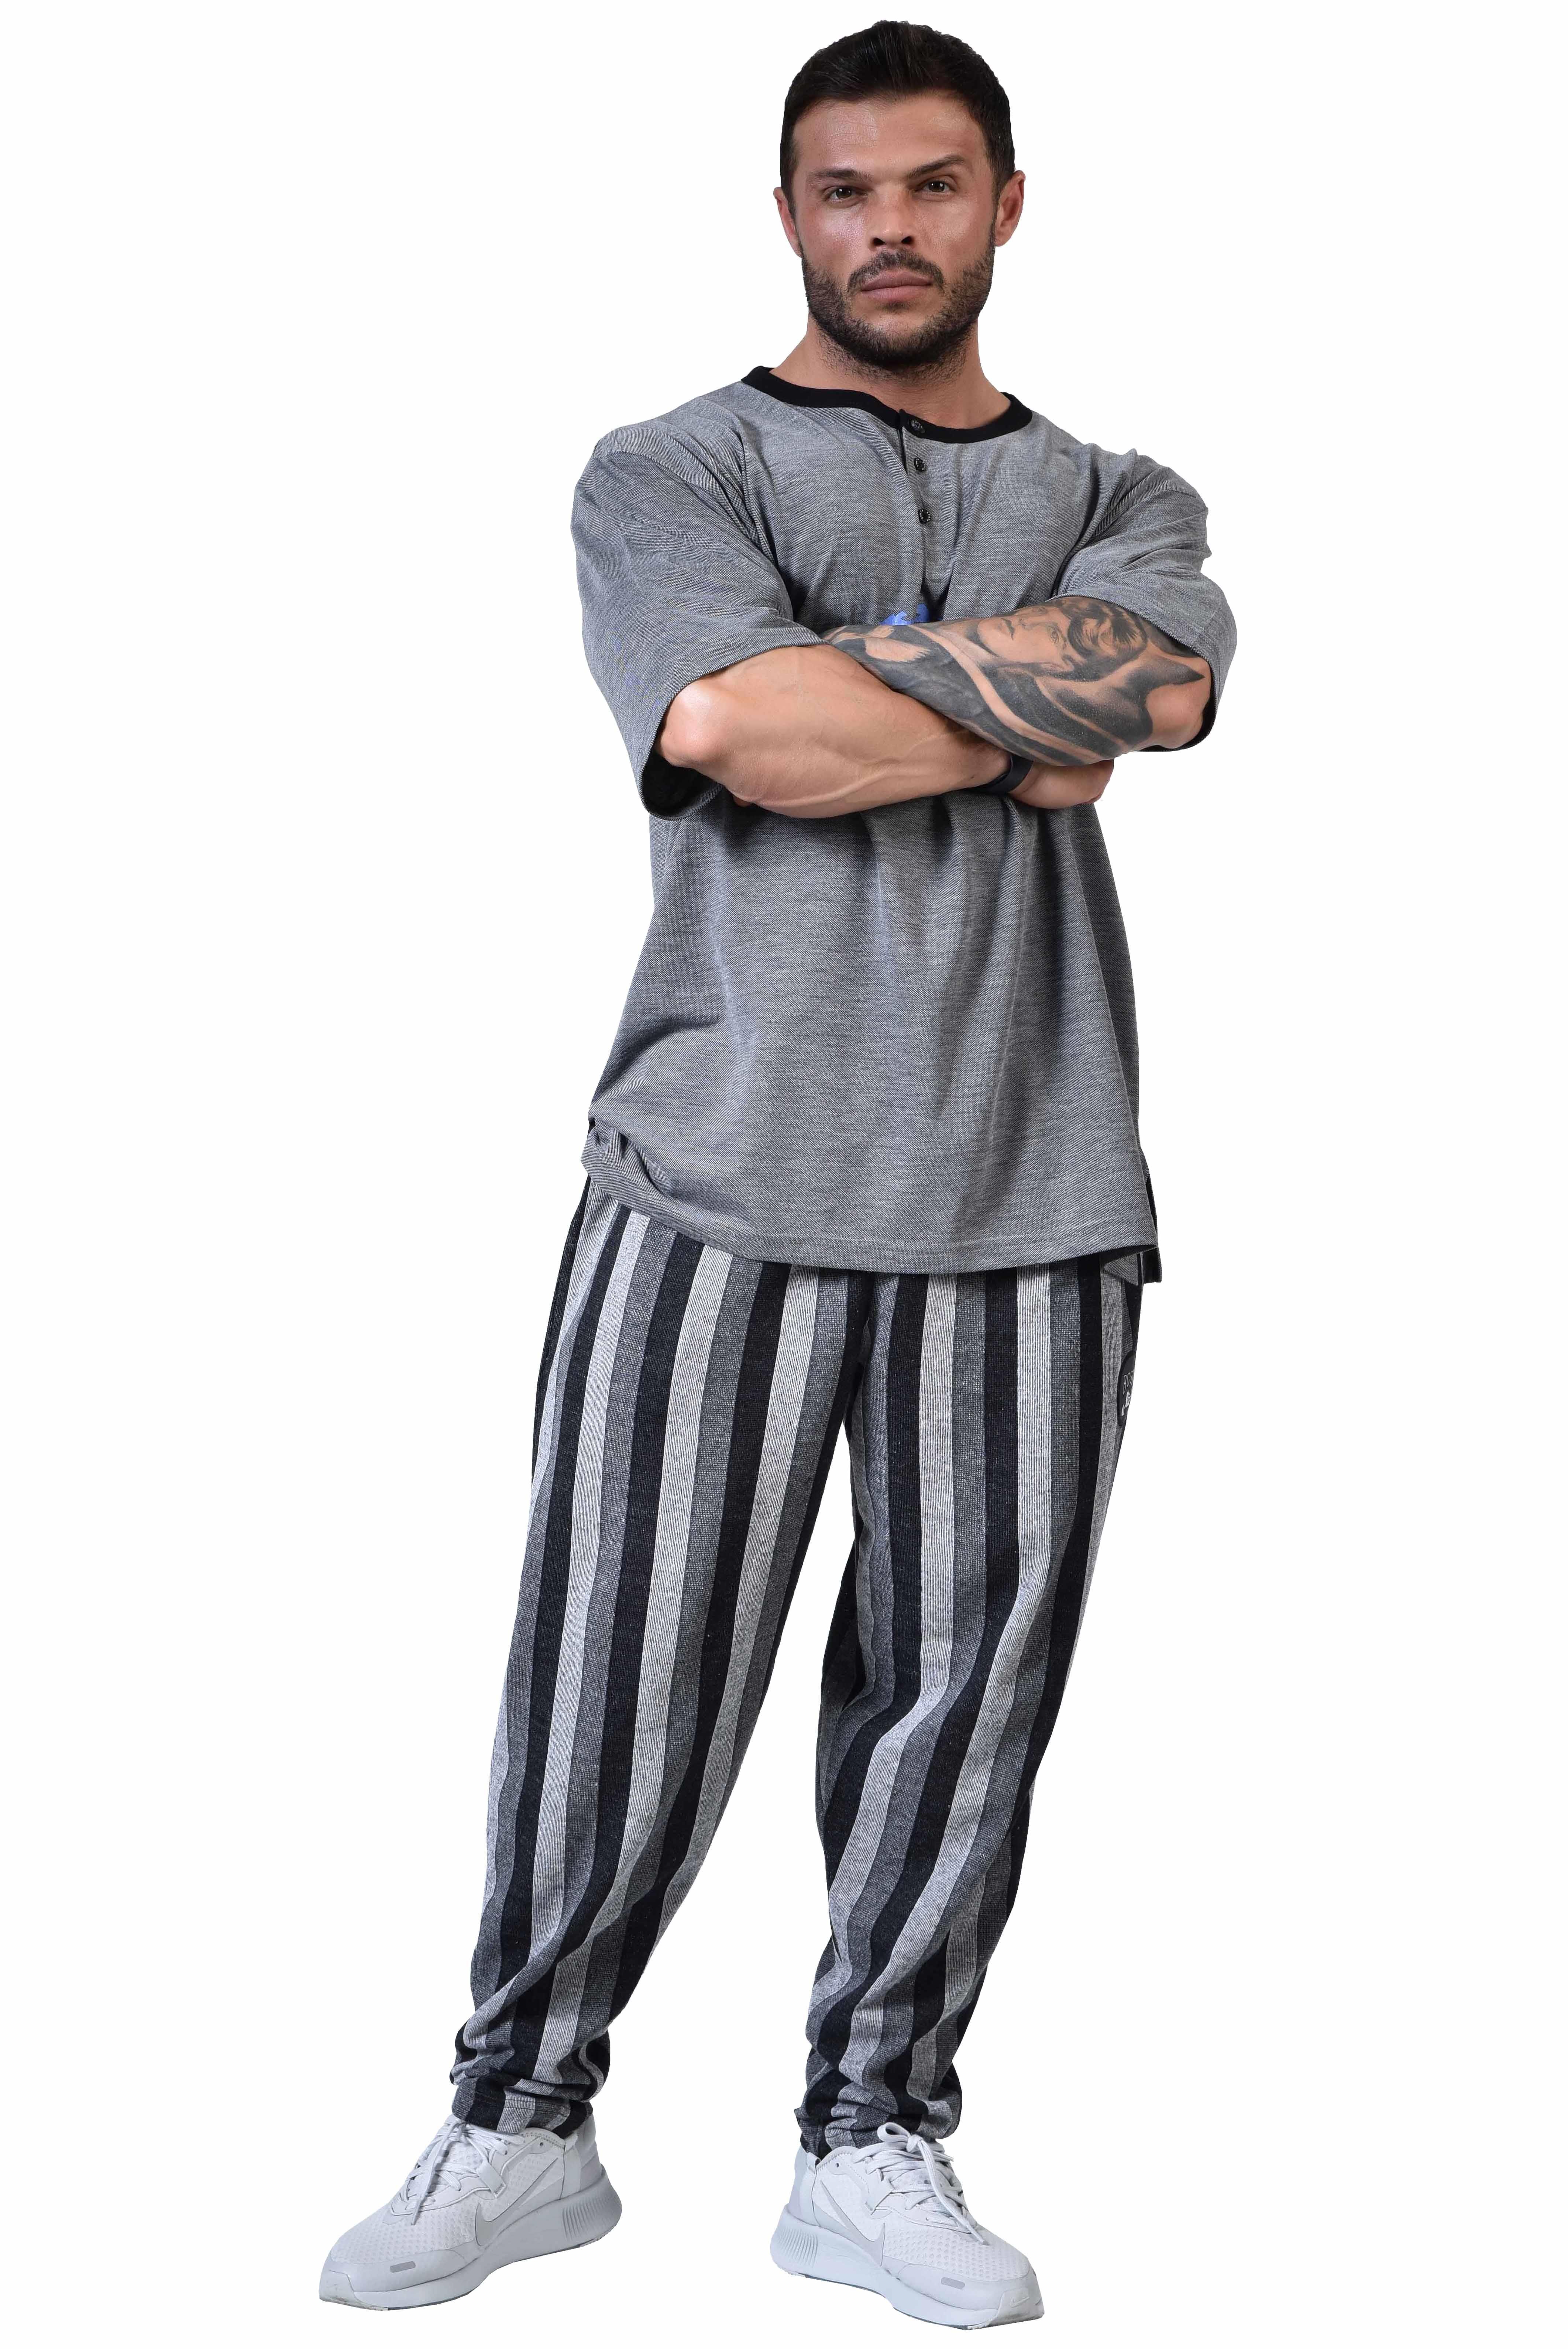 Striped Bodybuilding Baggy Workout Pants